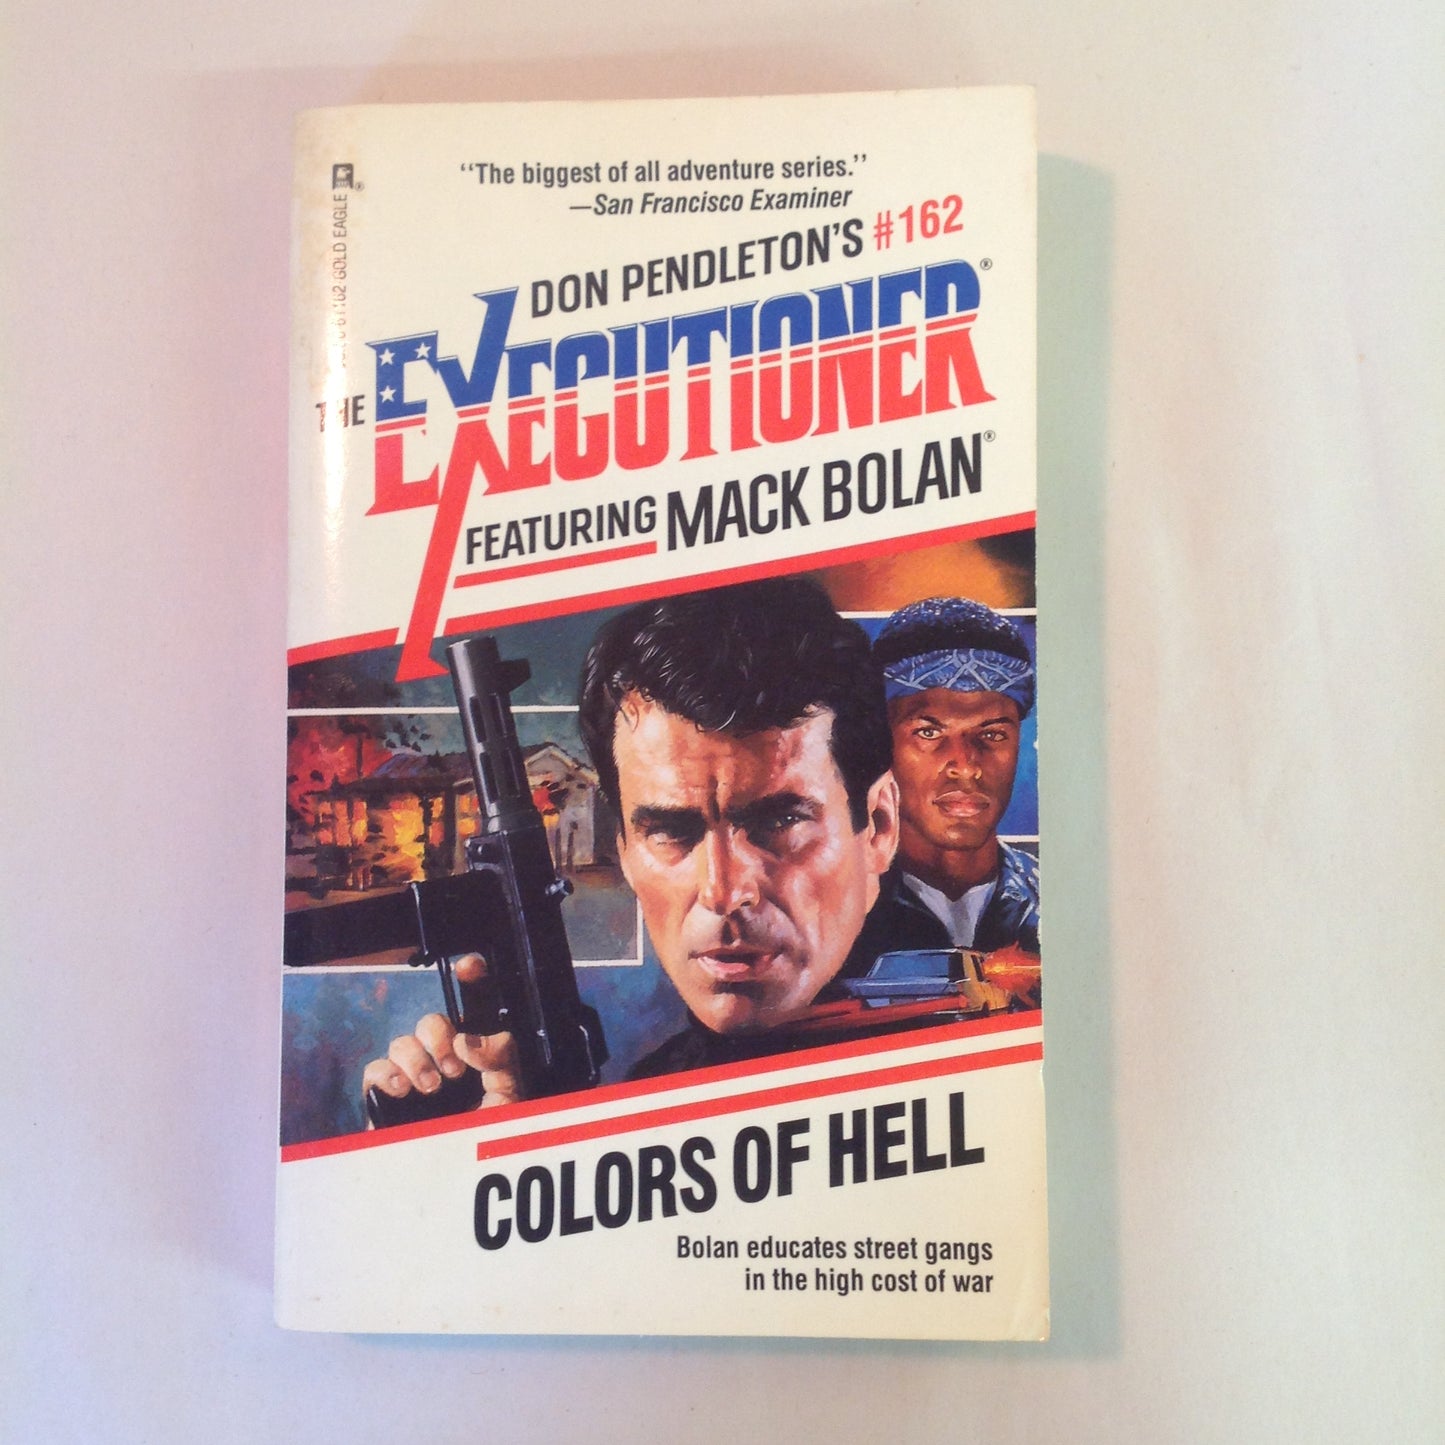 Vintage 1992 Mass Market Paperback The Executioner Featuring Mack Bolan #162: Colors of Hell Don Pendleton